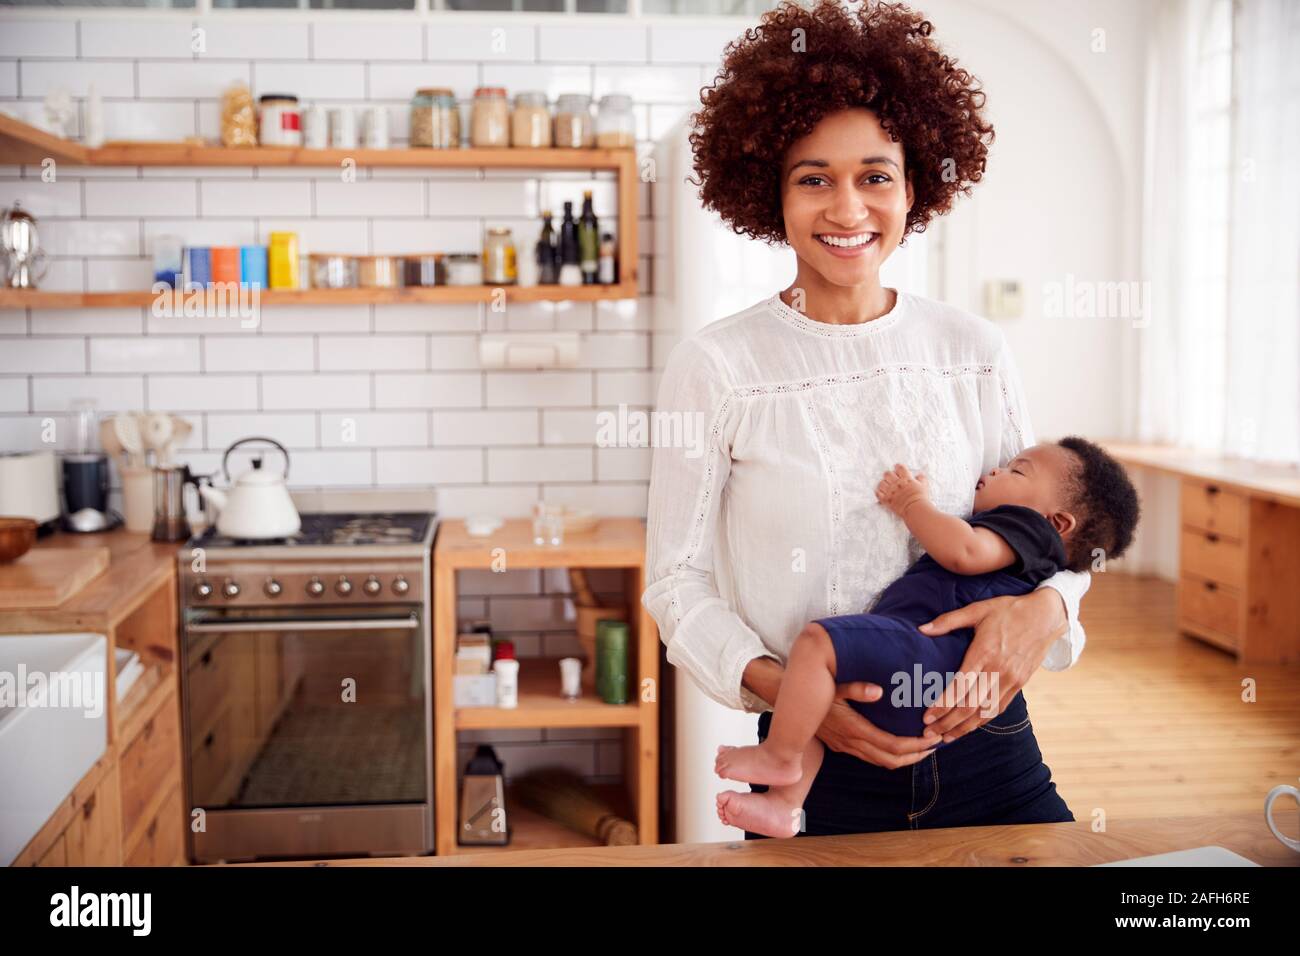 Portrait Of Smiling Mother Holding Sleeping Baby Son In Kitchen Stock Photo